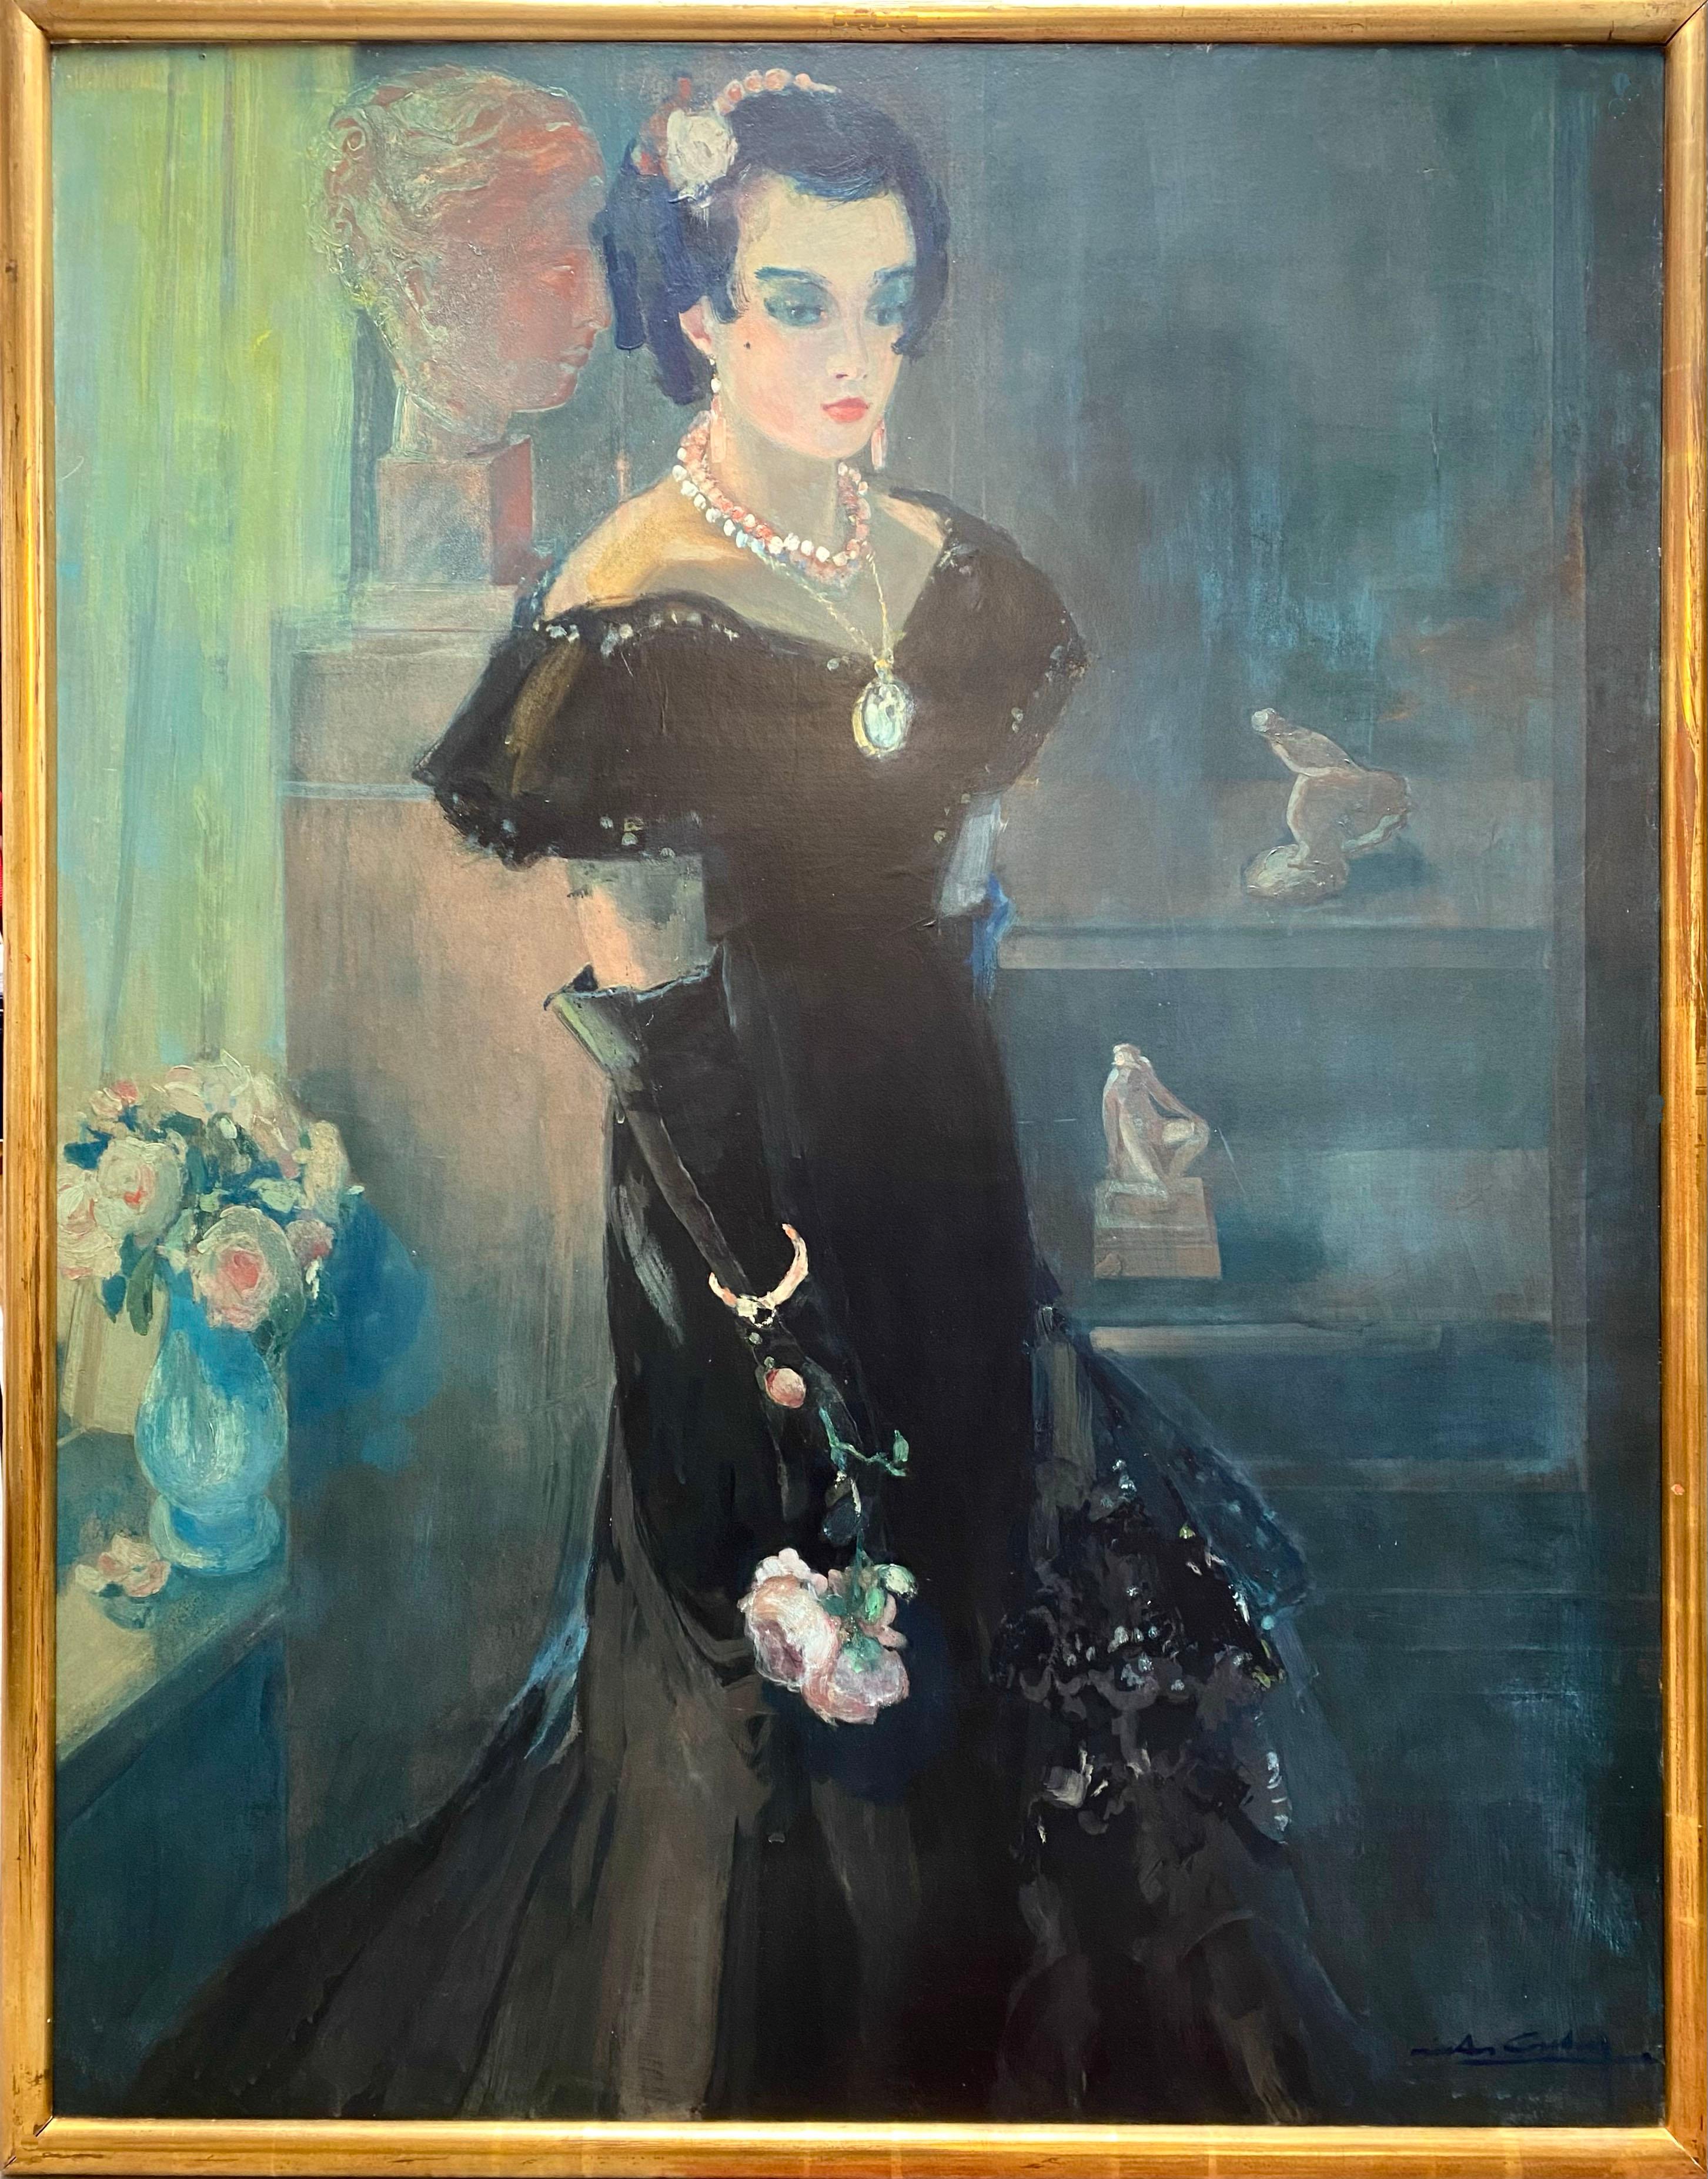 Victor Creten
Brussels 1878 – 1966
Belgian Painter

'A Lady in Black with a Rose'
Signature: Signed lower right
Medium: Oil on board
Dimensions: Image size 146 x 116 cm, frame size 155,50 x 122 cm

Biography: Creten Victor, born on December 8, 1878,